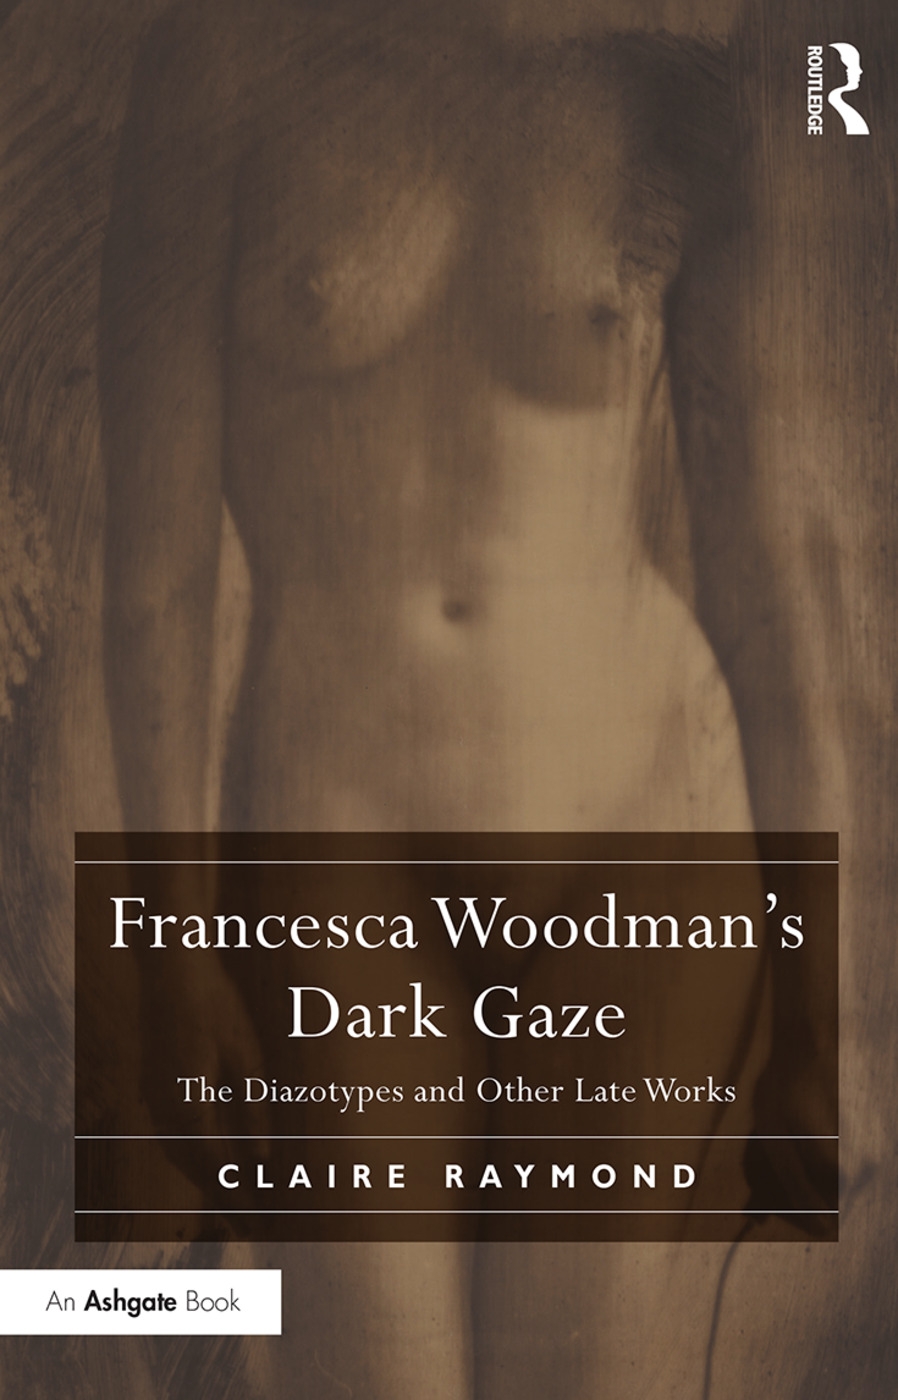 Francesca Woodman’s Dark Gaze: The Diazotypes and Other Late Works